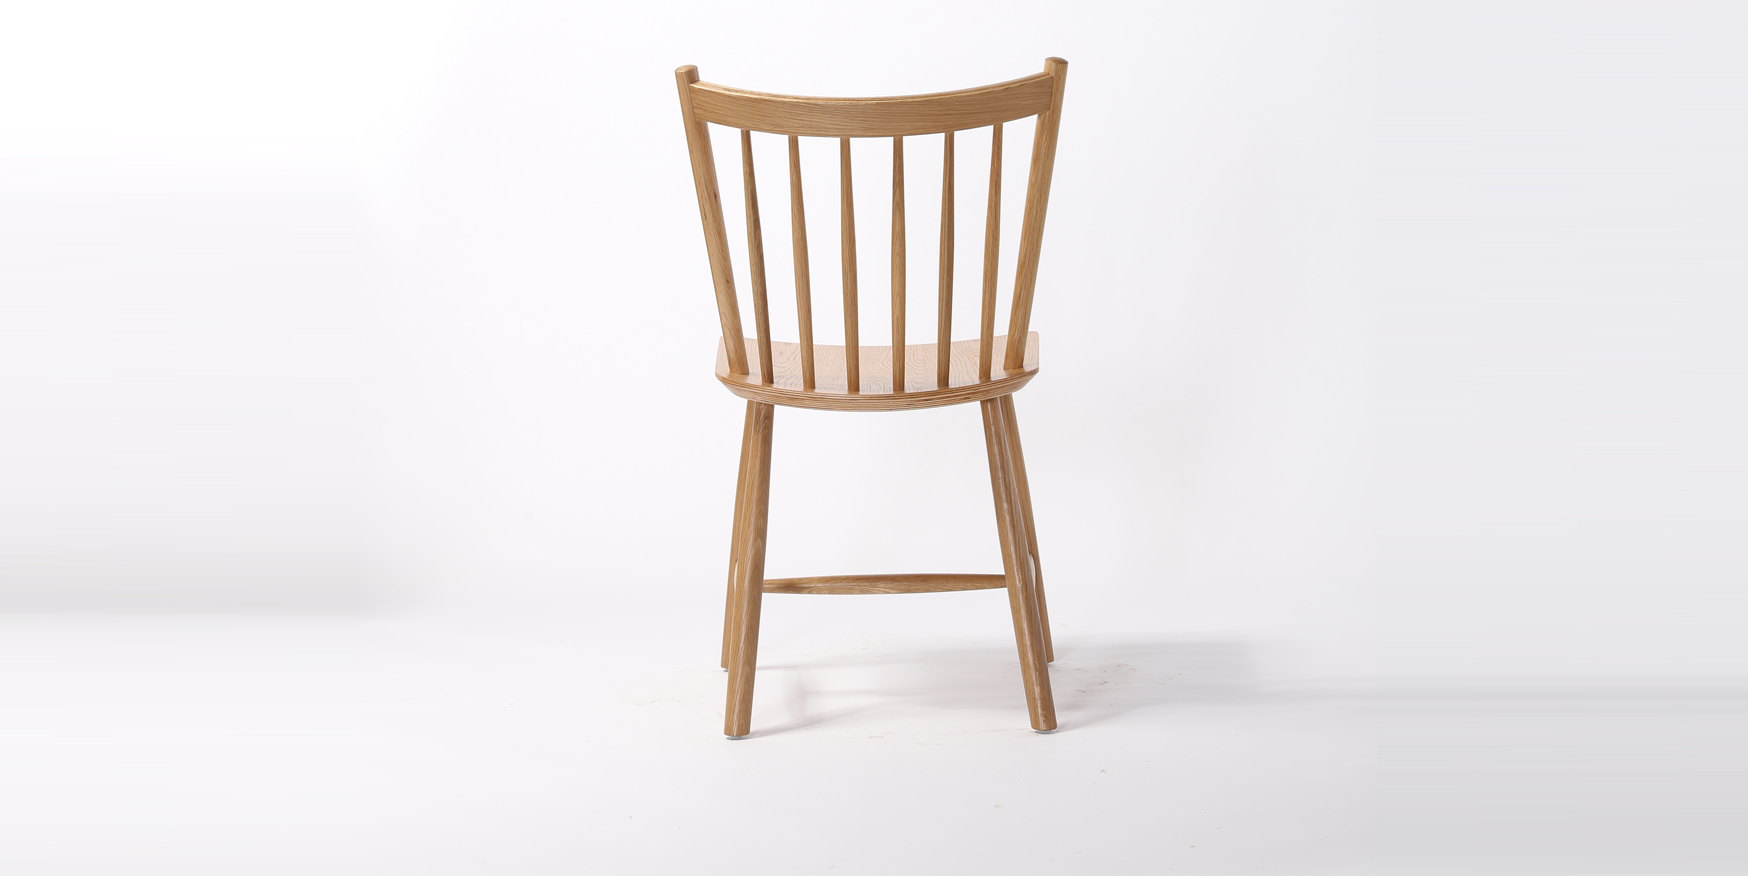 wooden windsor chairs
